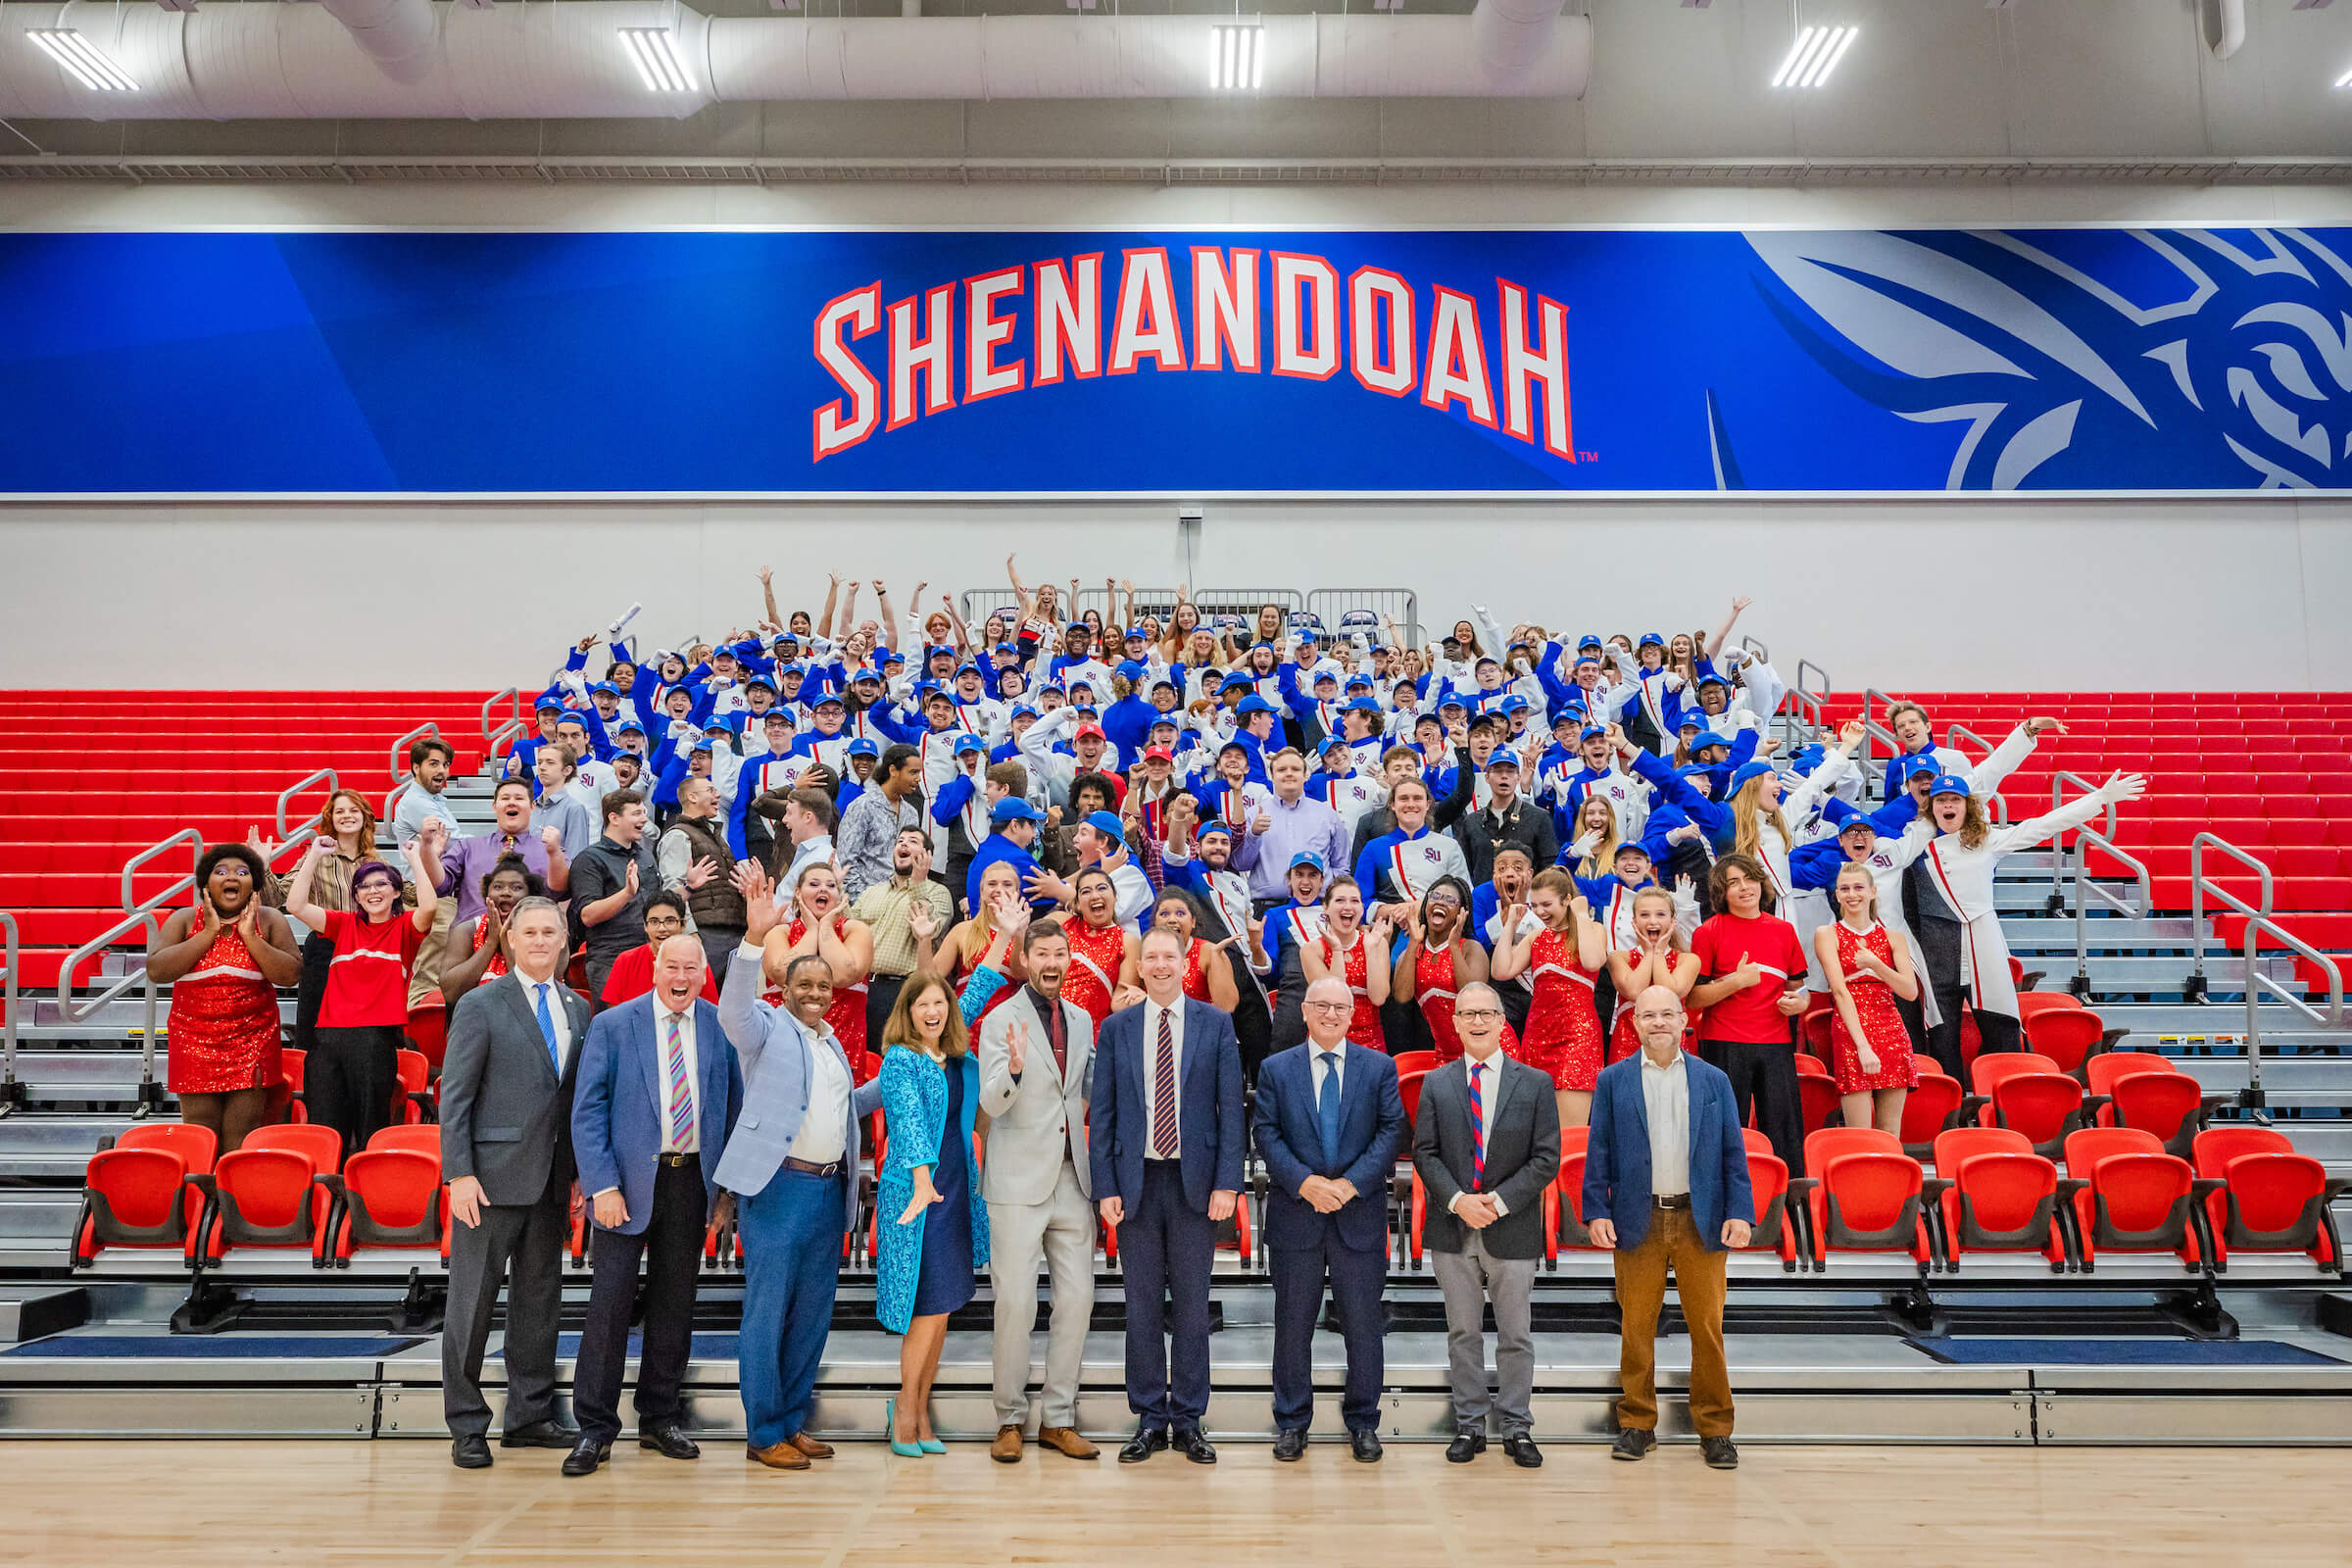 Shenandoah University Marching Band Chosen To Perform in London’s New Year’s Day Parade 2025 Invitation extended at special surprise announcement at the Wilkins Athletics and Events Center